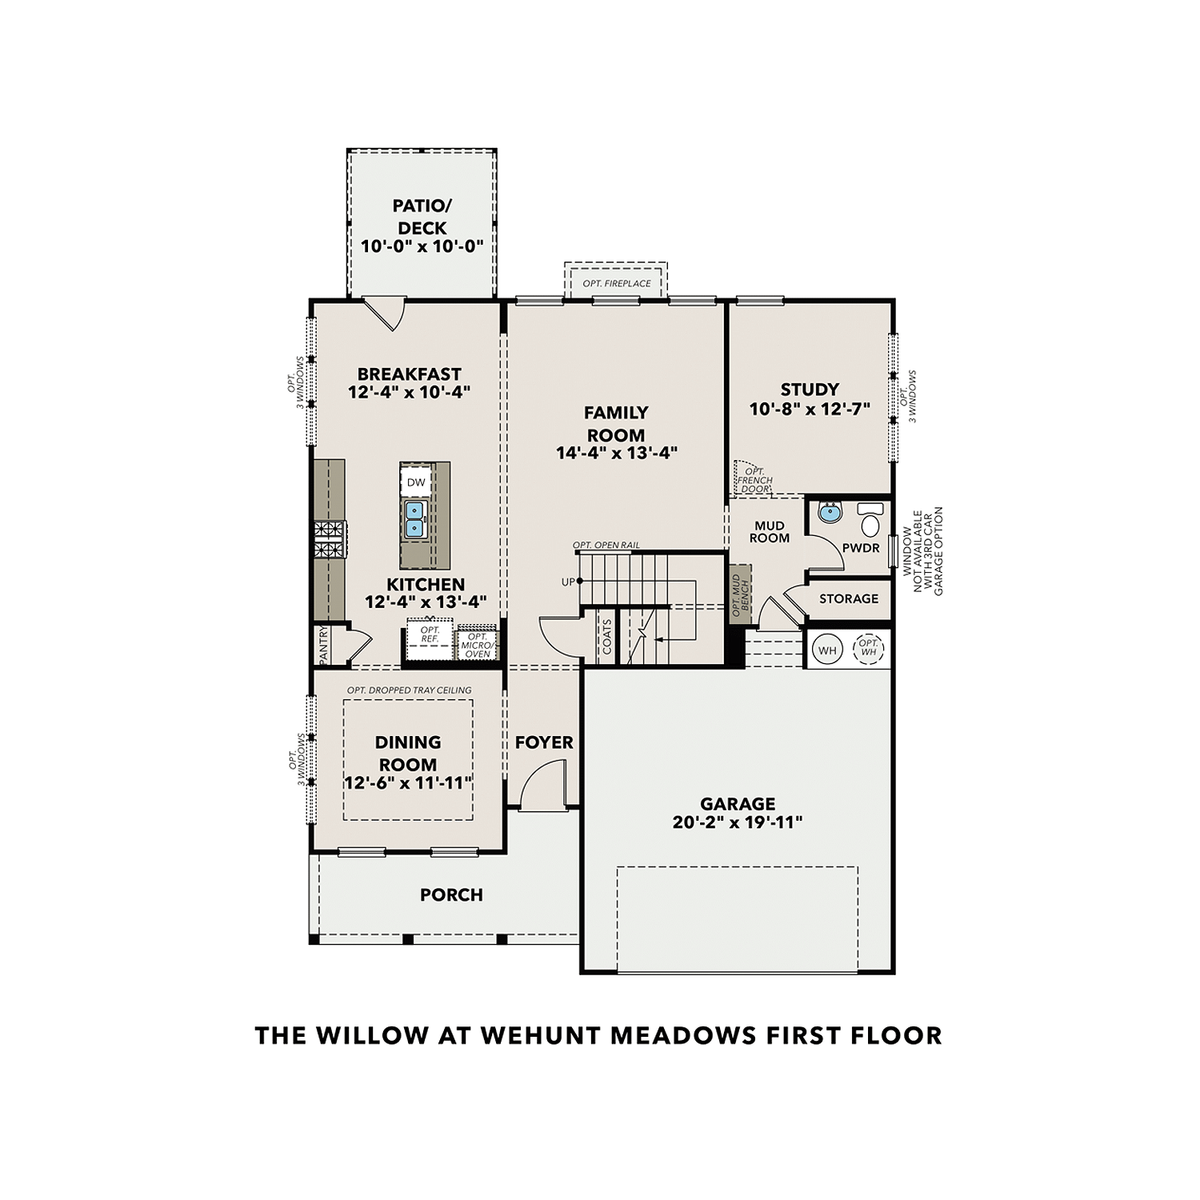 1 - The Willow B at Wehunt Meadows  buildable floor plan layout in Davidson Homes' Wehunt Meadows community.